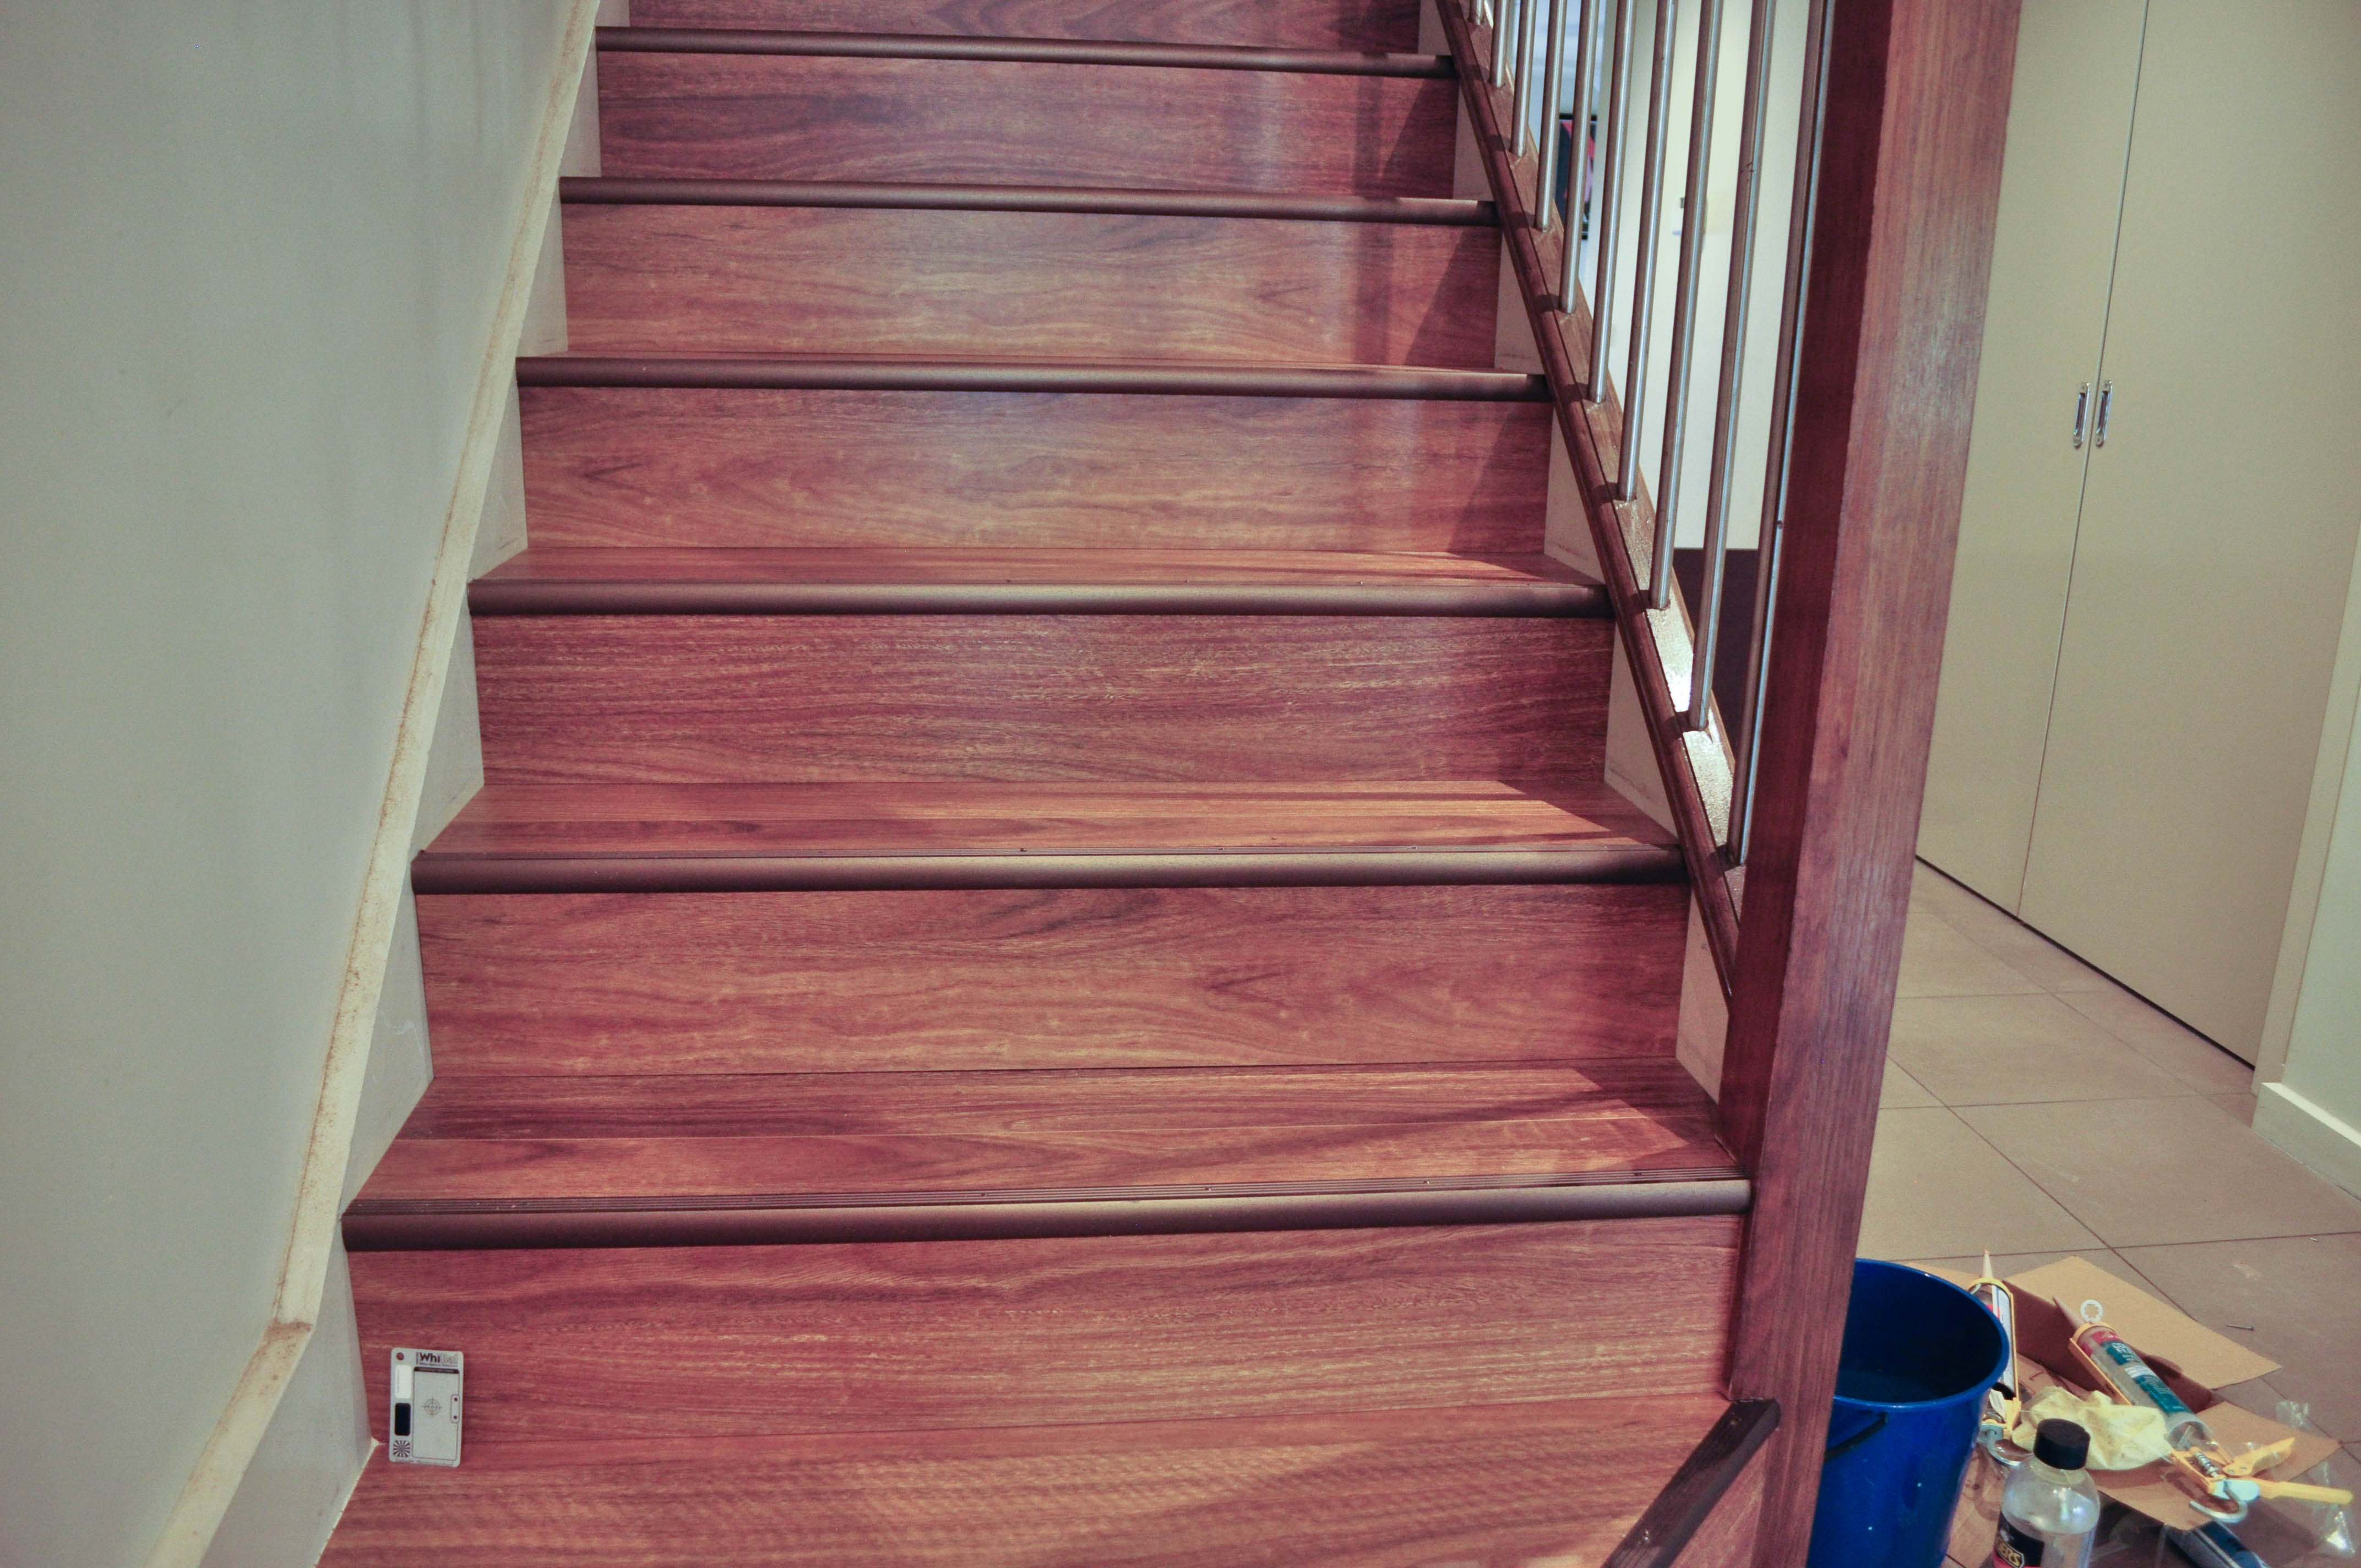 The laminate installation on a staircase done by Concord Floors. Showing 7 steps of the staircase.